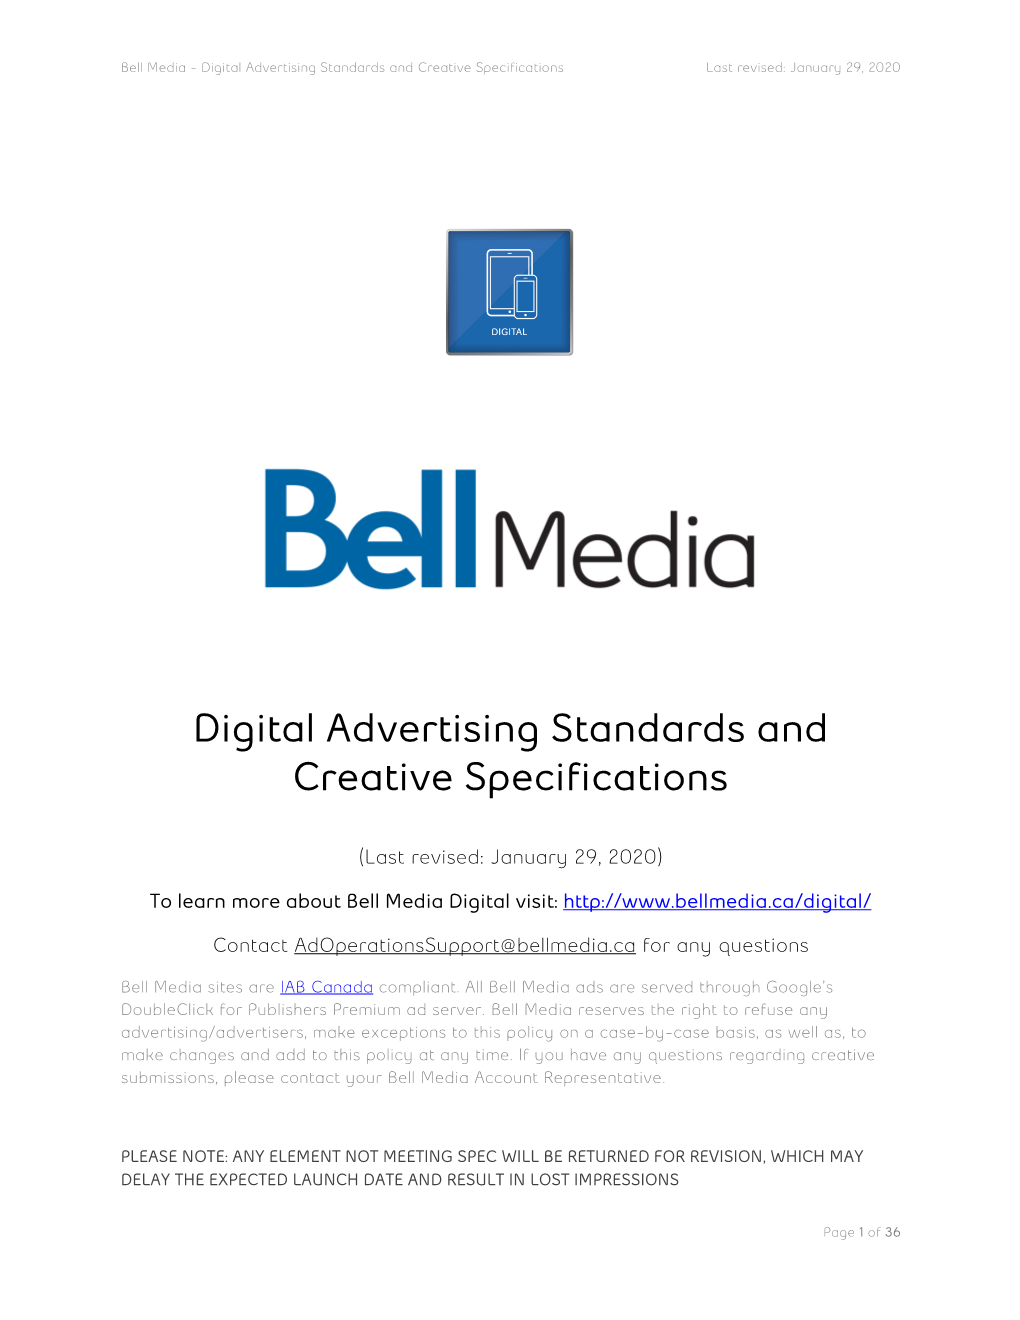 Digital Advertising Standards and Creative Specifications Last Revised: January 29, 2020